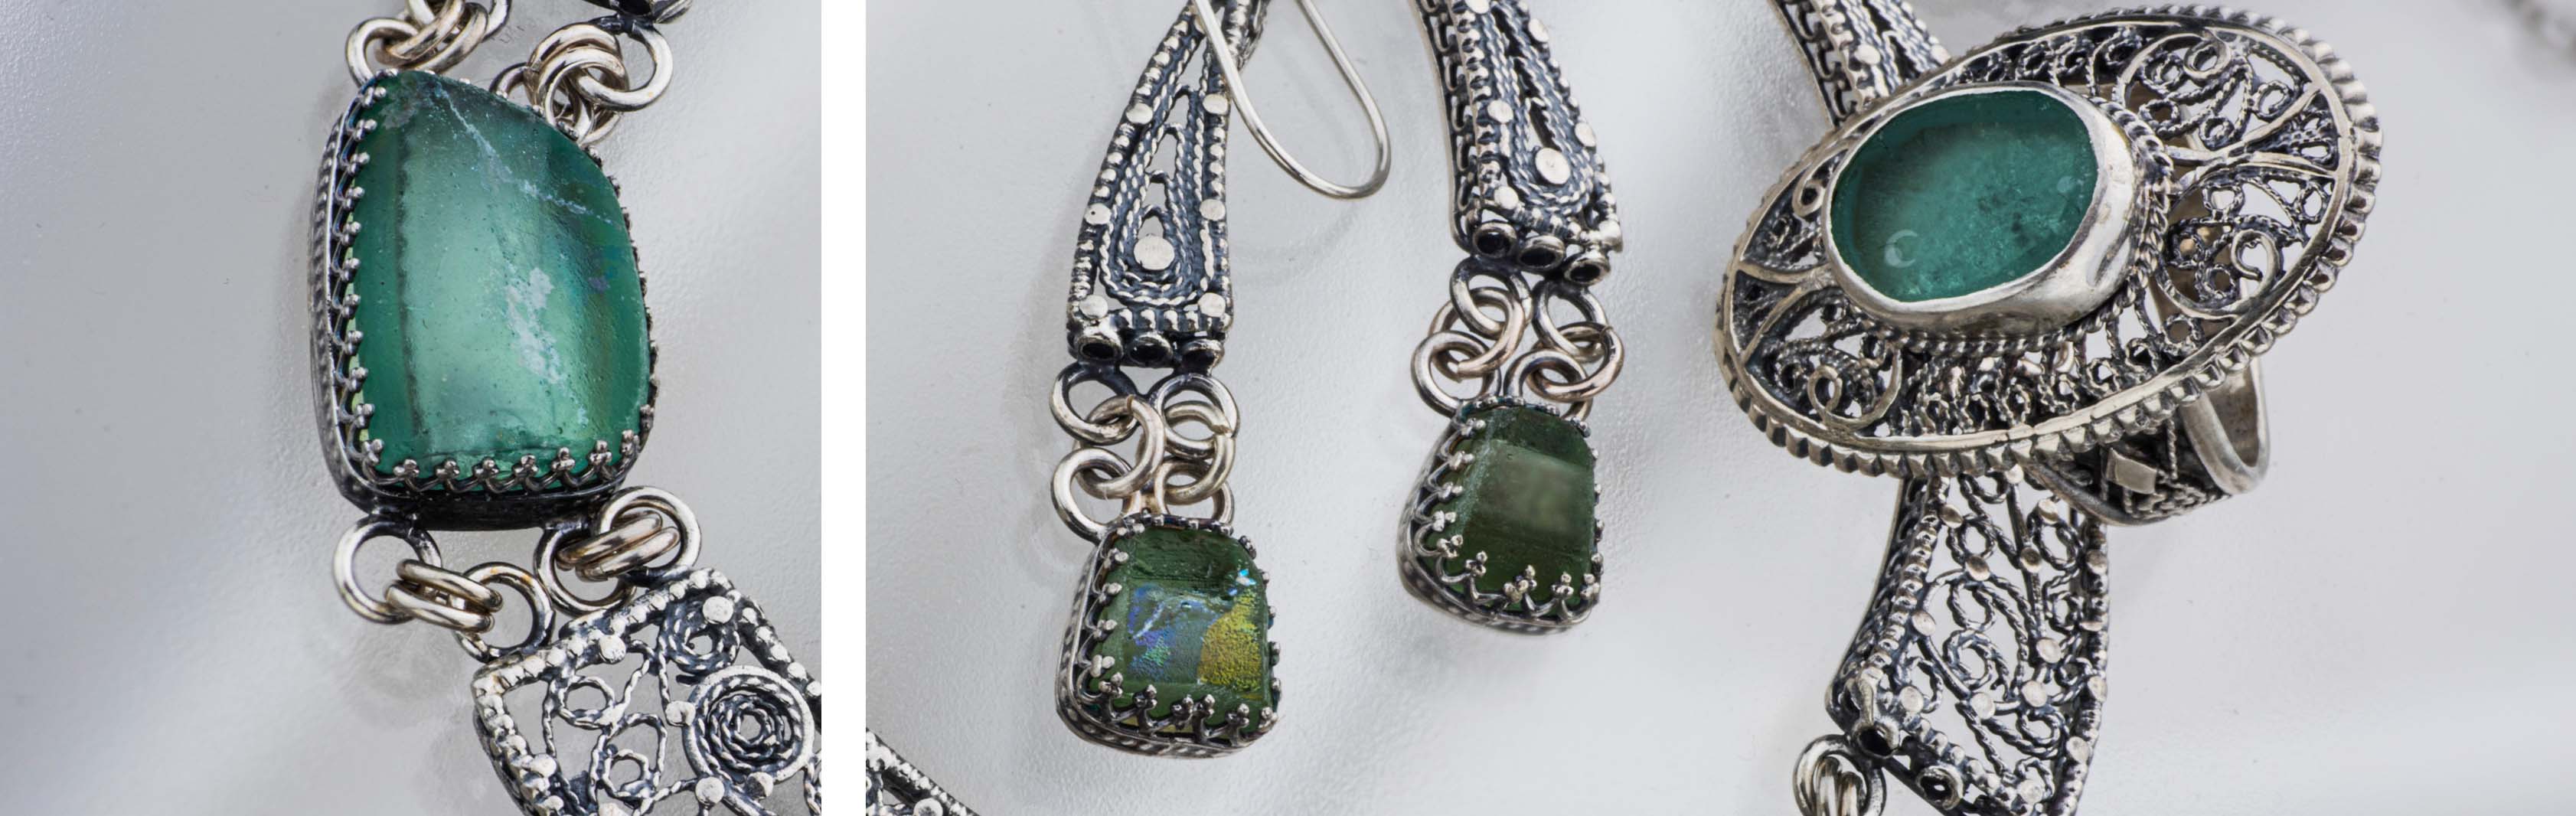 Apollonia Collection | 925 Sterling Silver Yemenite Filigree Jewelry set with Ancient Roman Glass